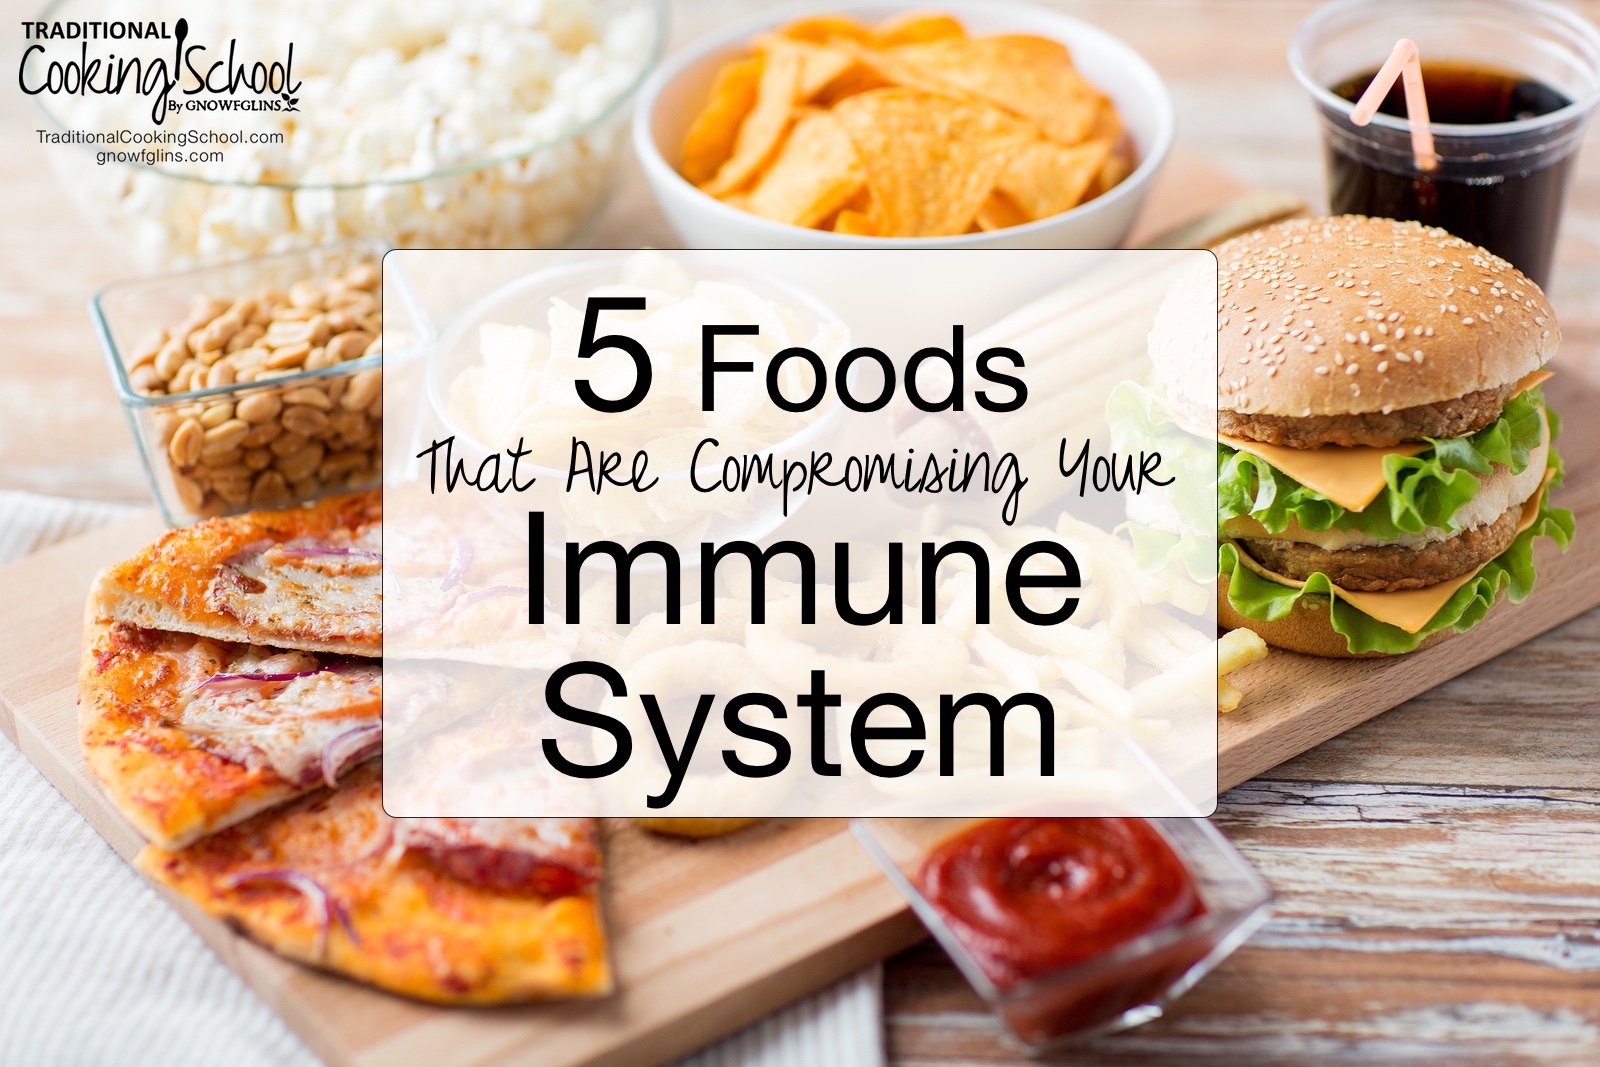 5 Foods That Are Compromising Your Immune System | The one thing that could be hurting your immune system? It's not how much you exercise, what supplements you take, or what natural practitioner you visit. Can you guess what that one thing is? It's the food you eat! Here are the top five foods you can reduce or eliminate for the sake of your immune system. | TraditionalCookingSchool.com